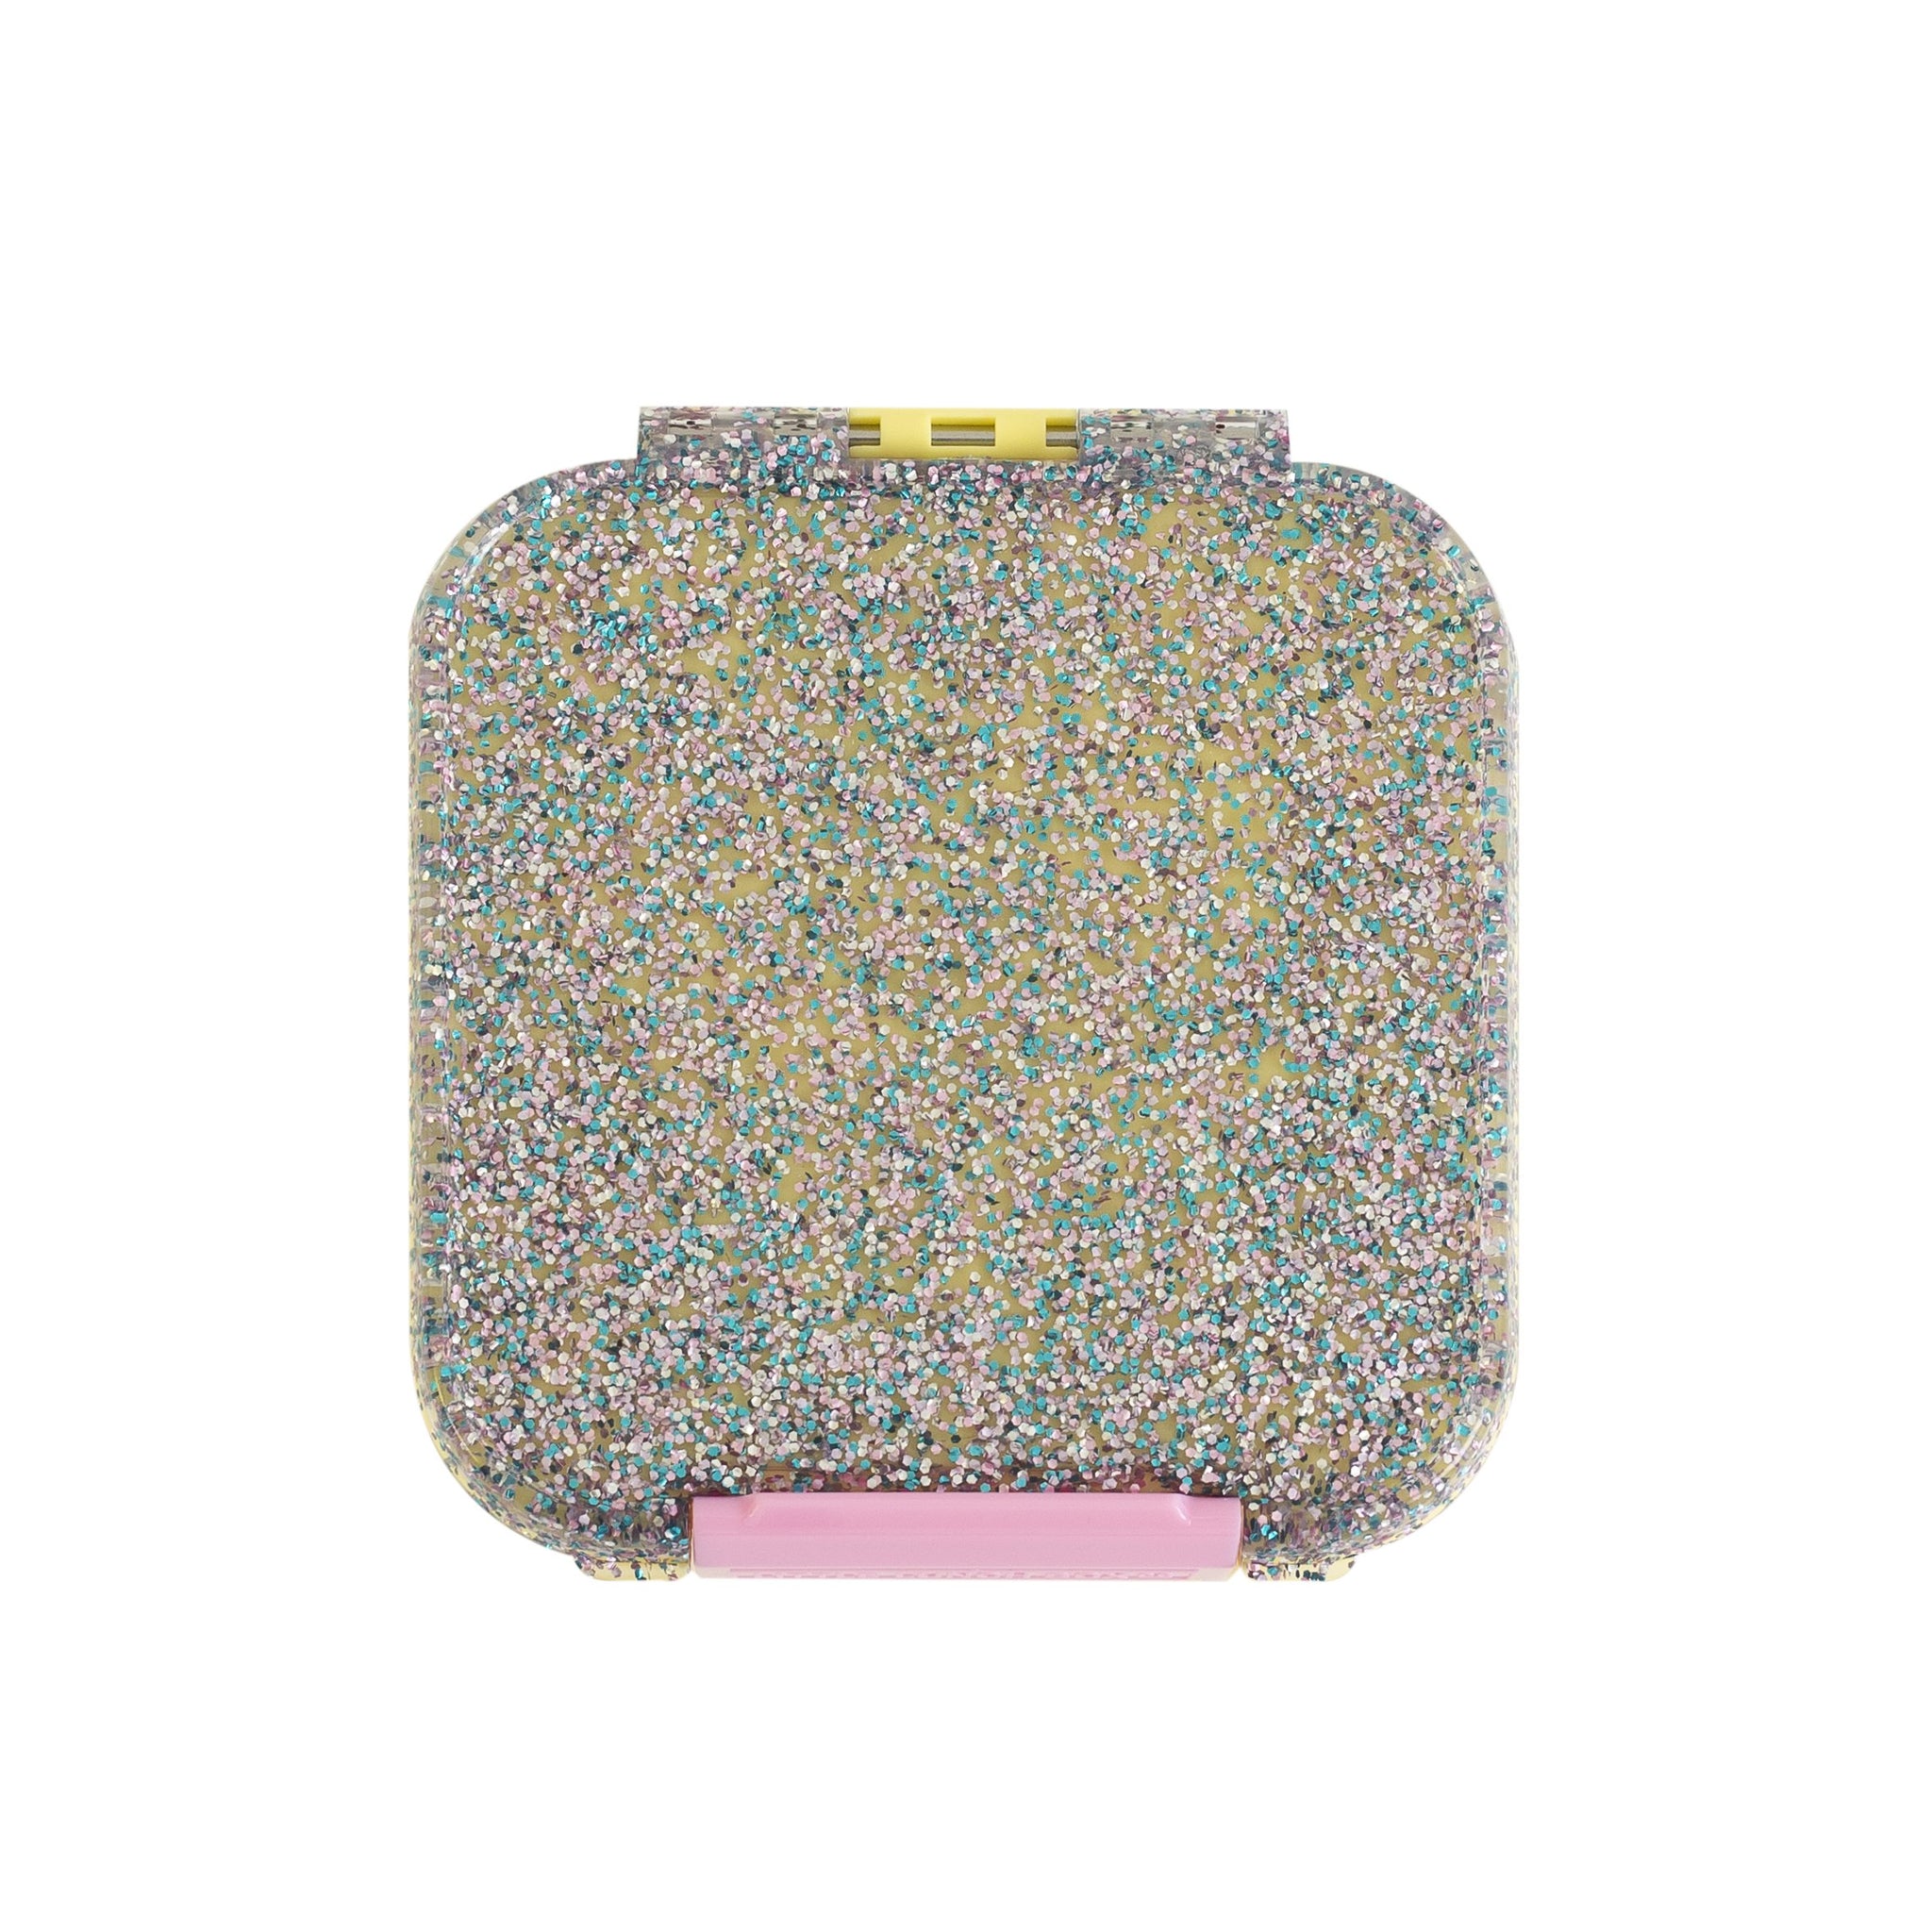 Little Lunch Box Co - Bento Two - Yellow Glitter